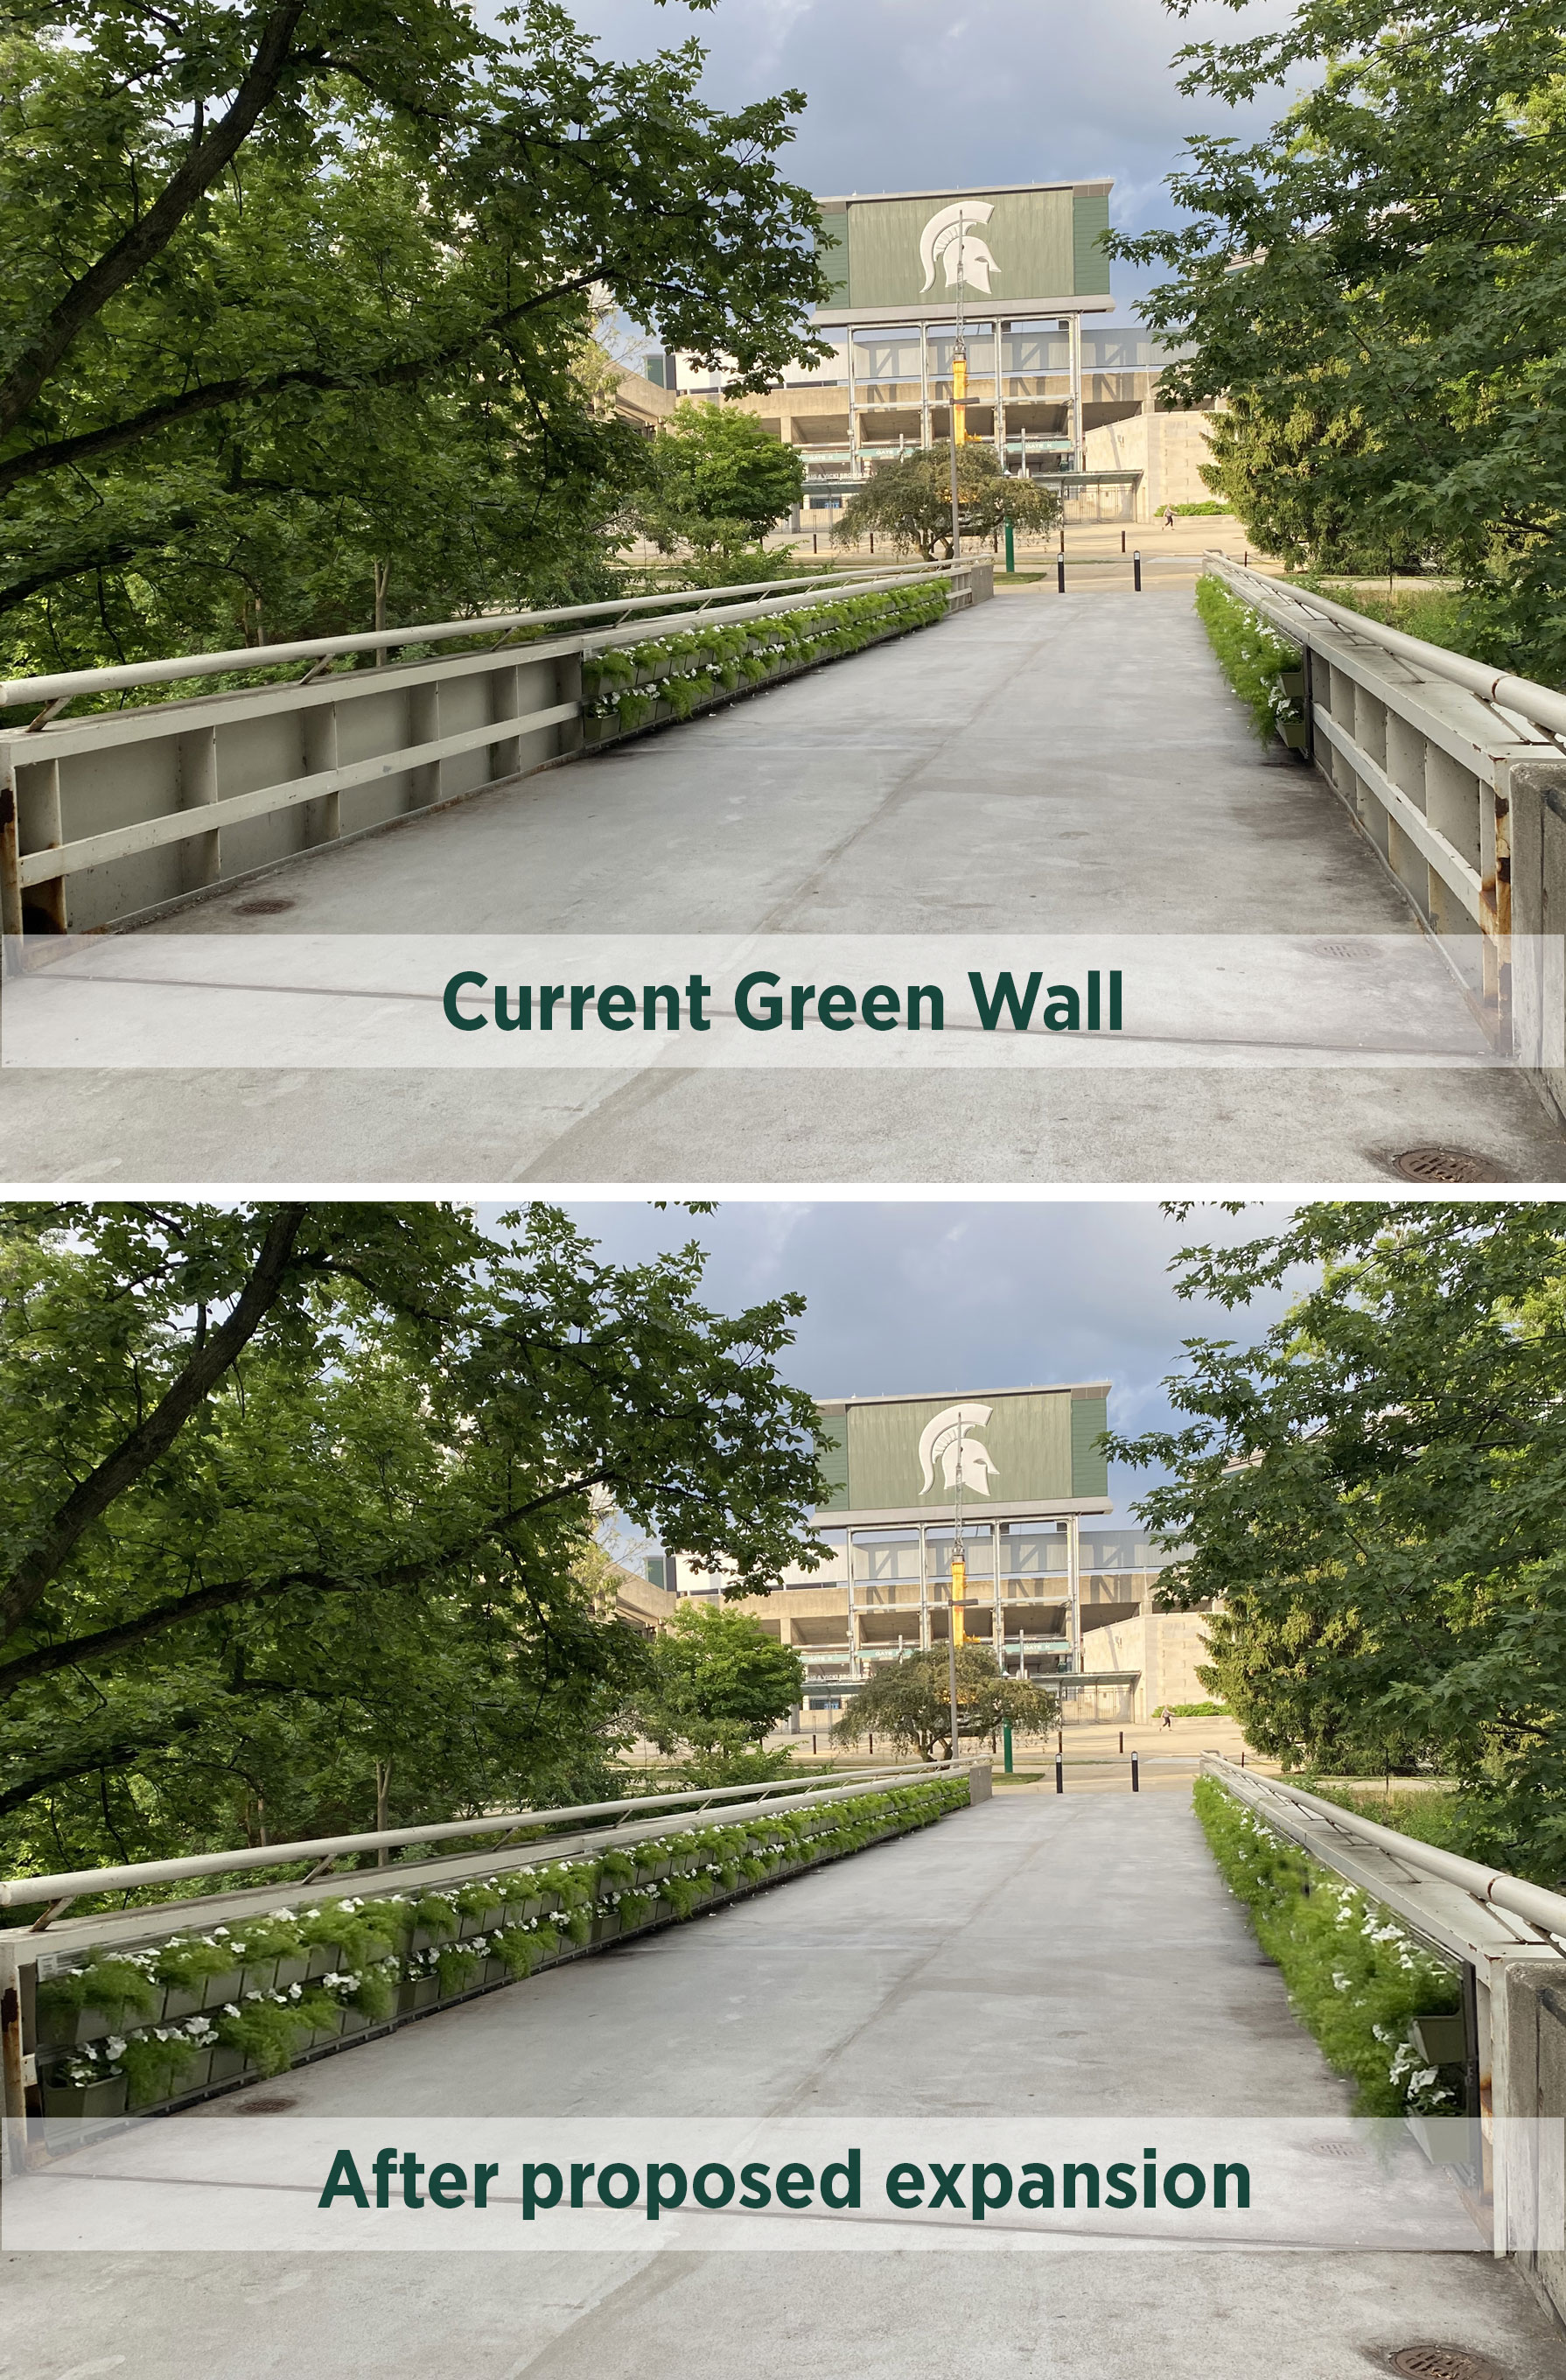 photo of the wall showcasing the current green wall followed by an image of what it could look like after the proposed expansion